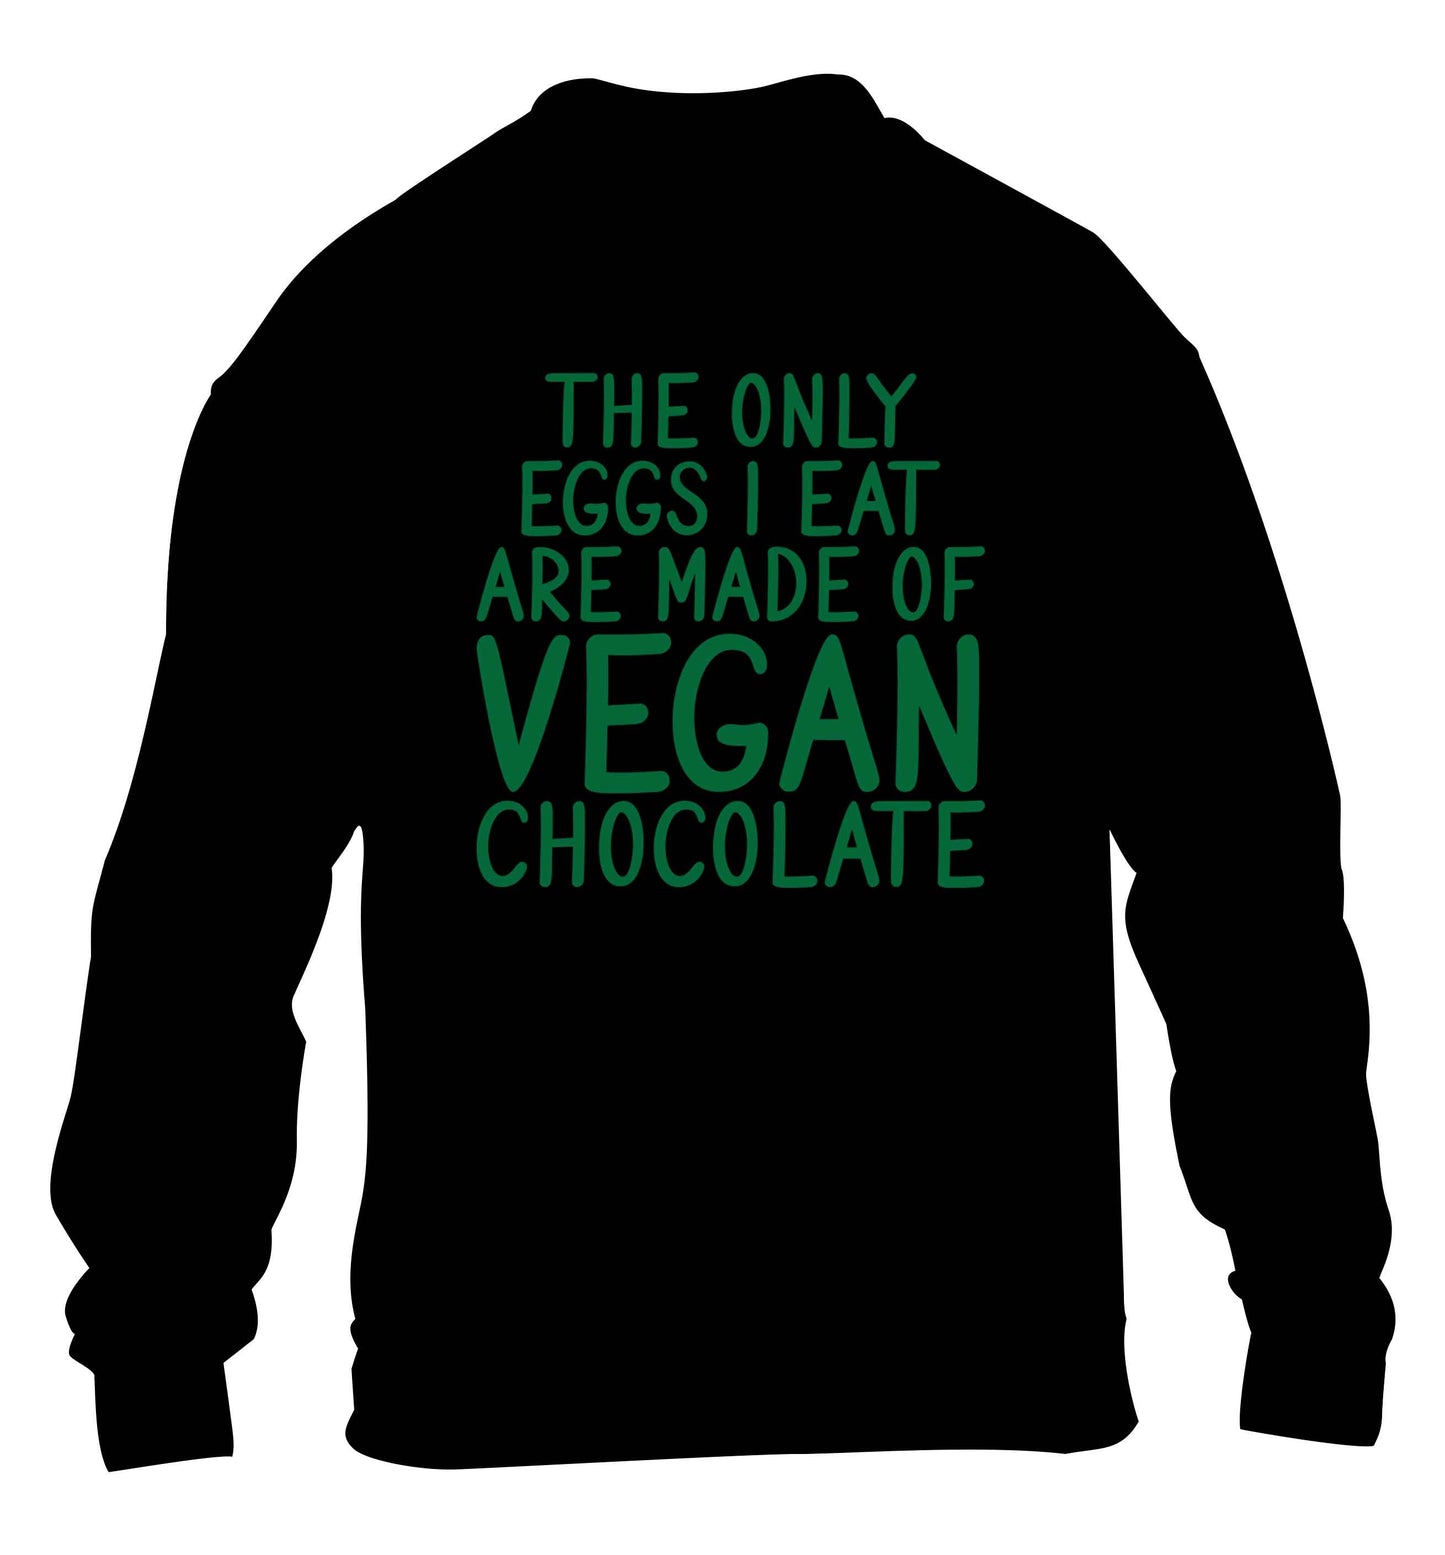 The only eggs I eat are made of vegan chocolate children's black sweater 12-13 Years